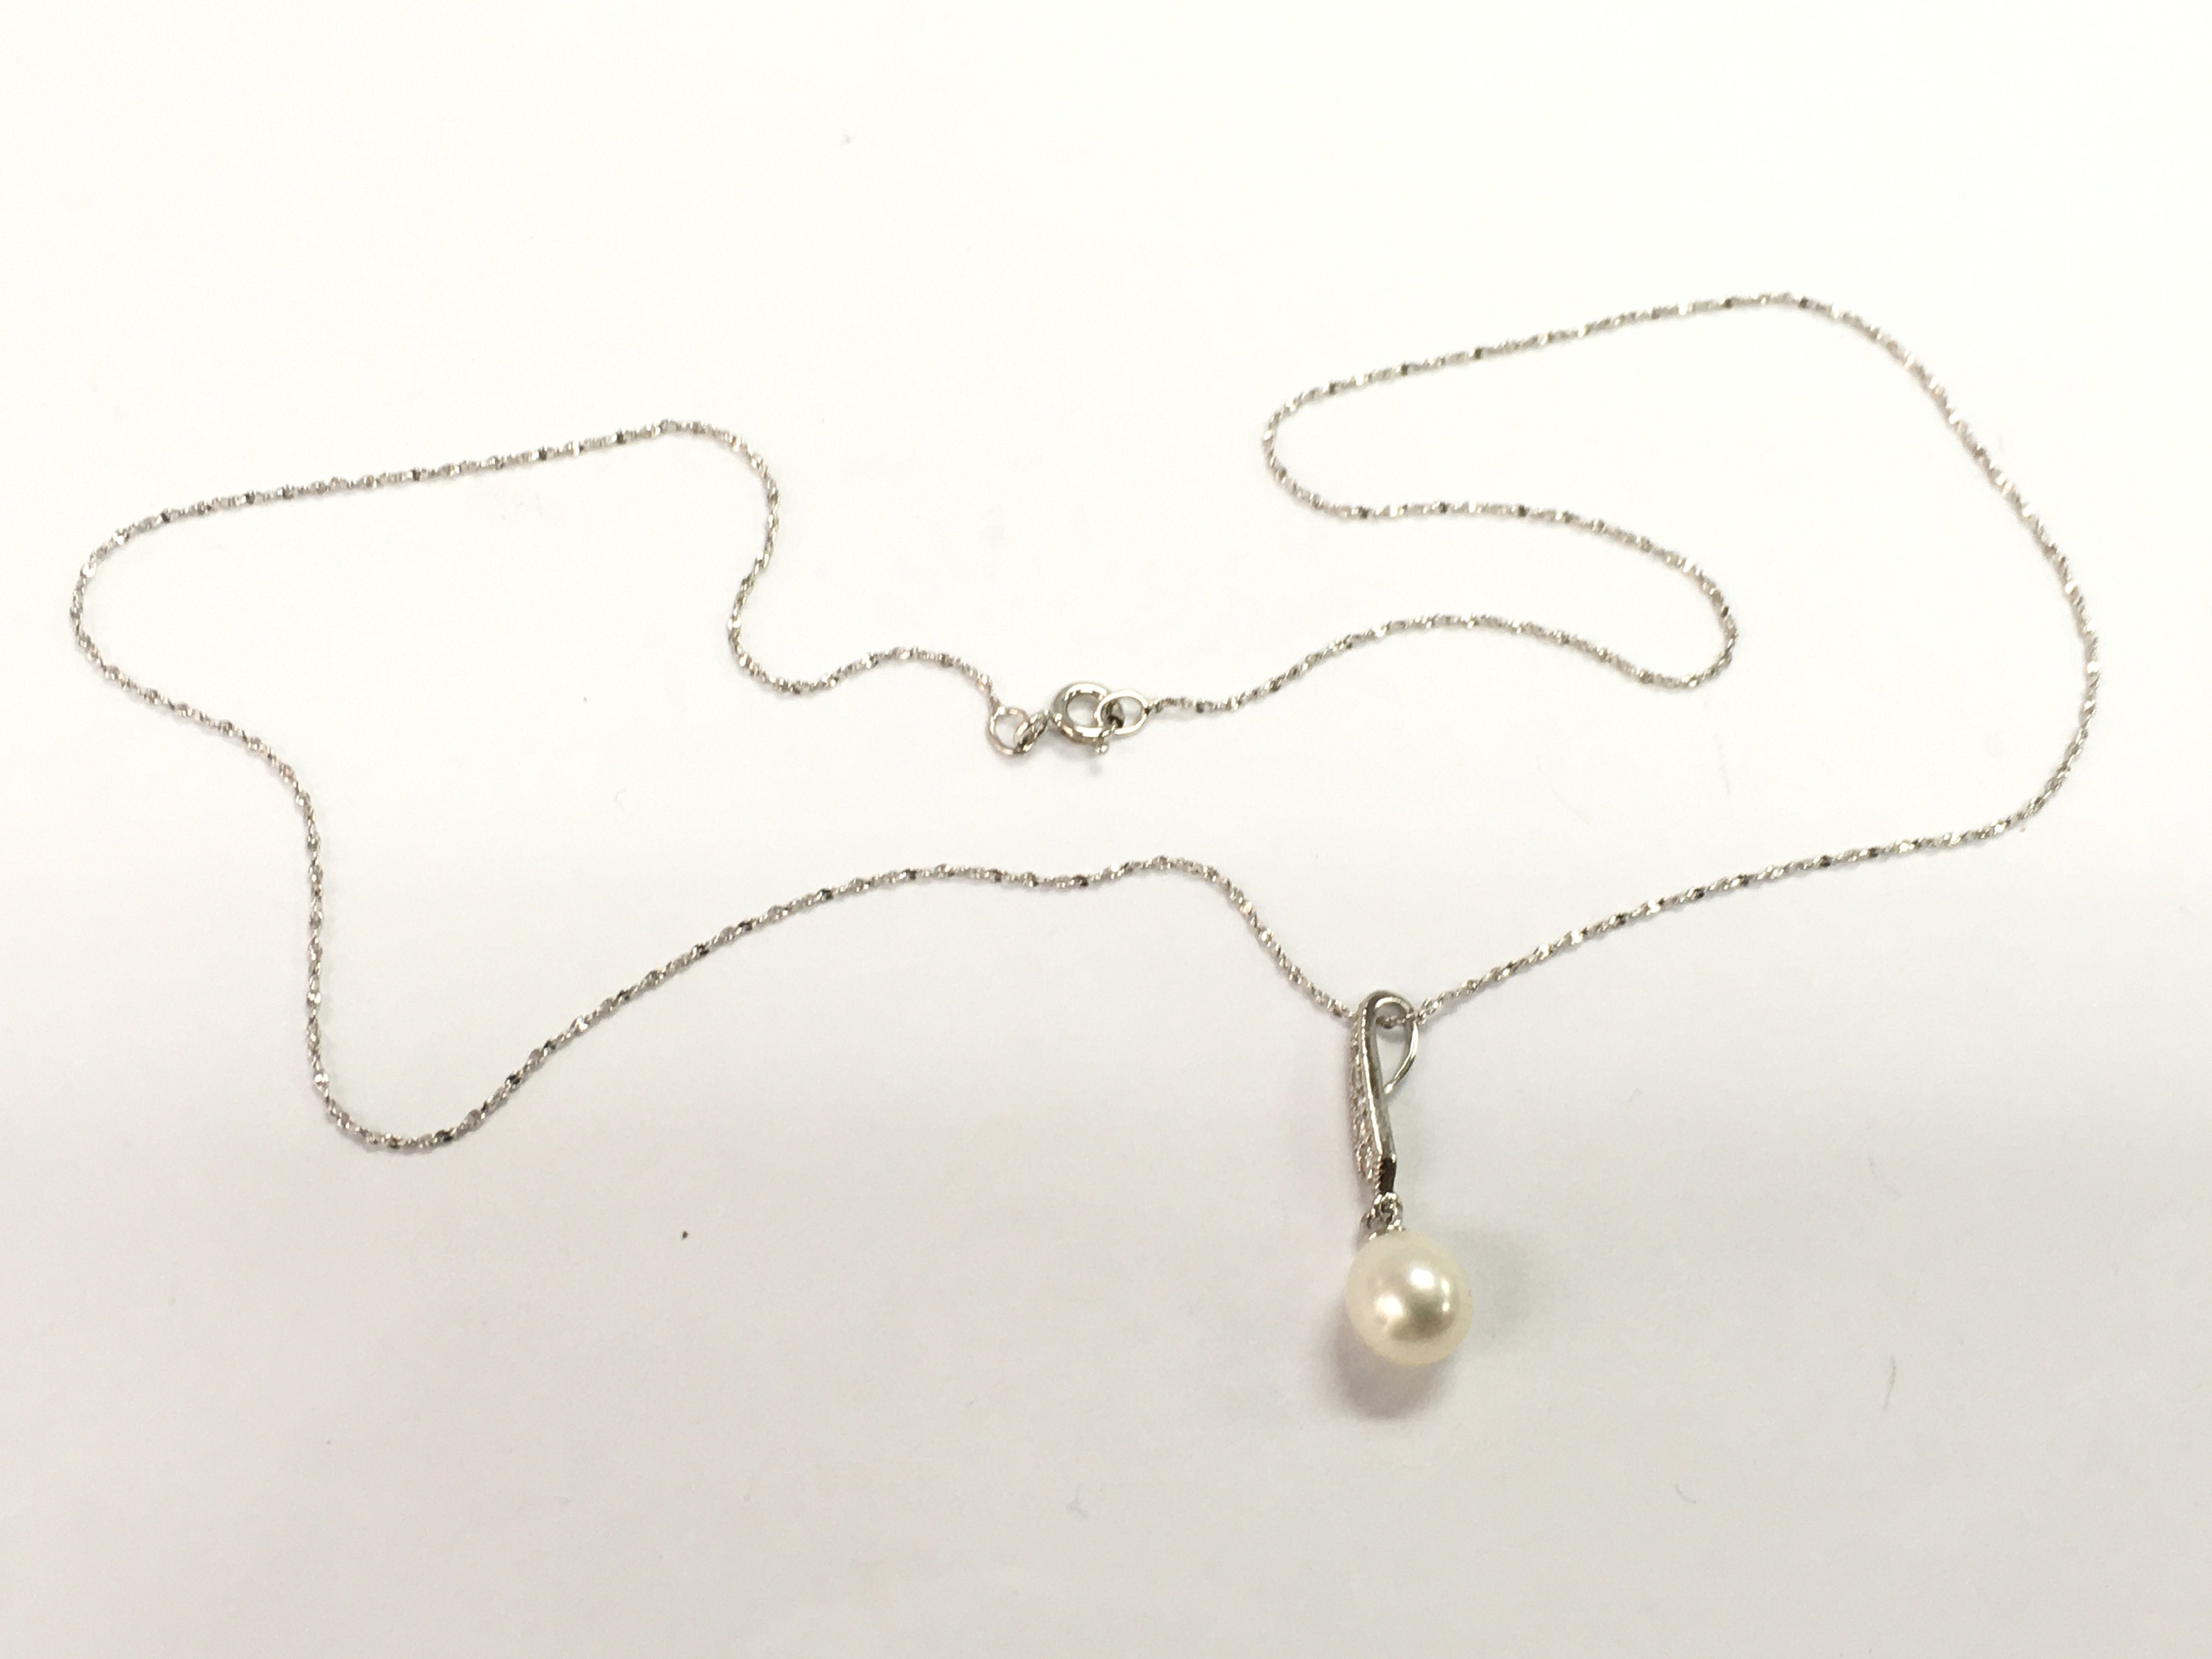 A 9ct white gold necklace with a pearl pendant, ap